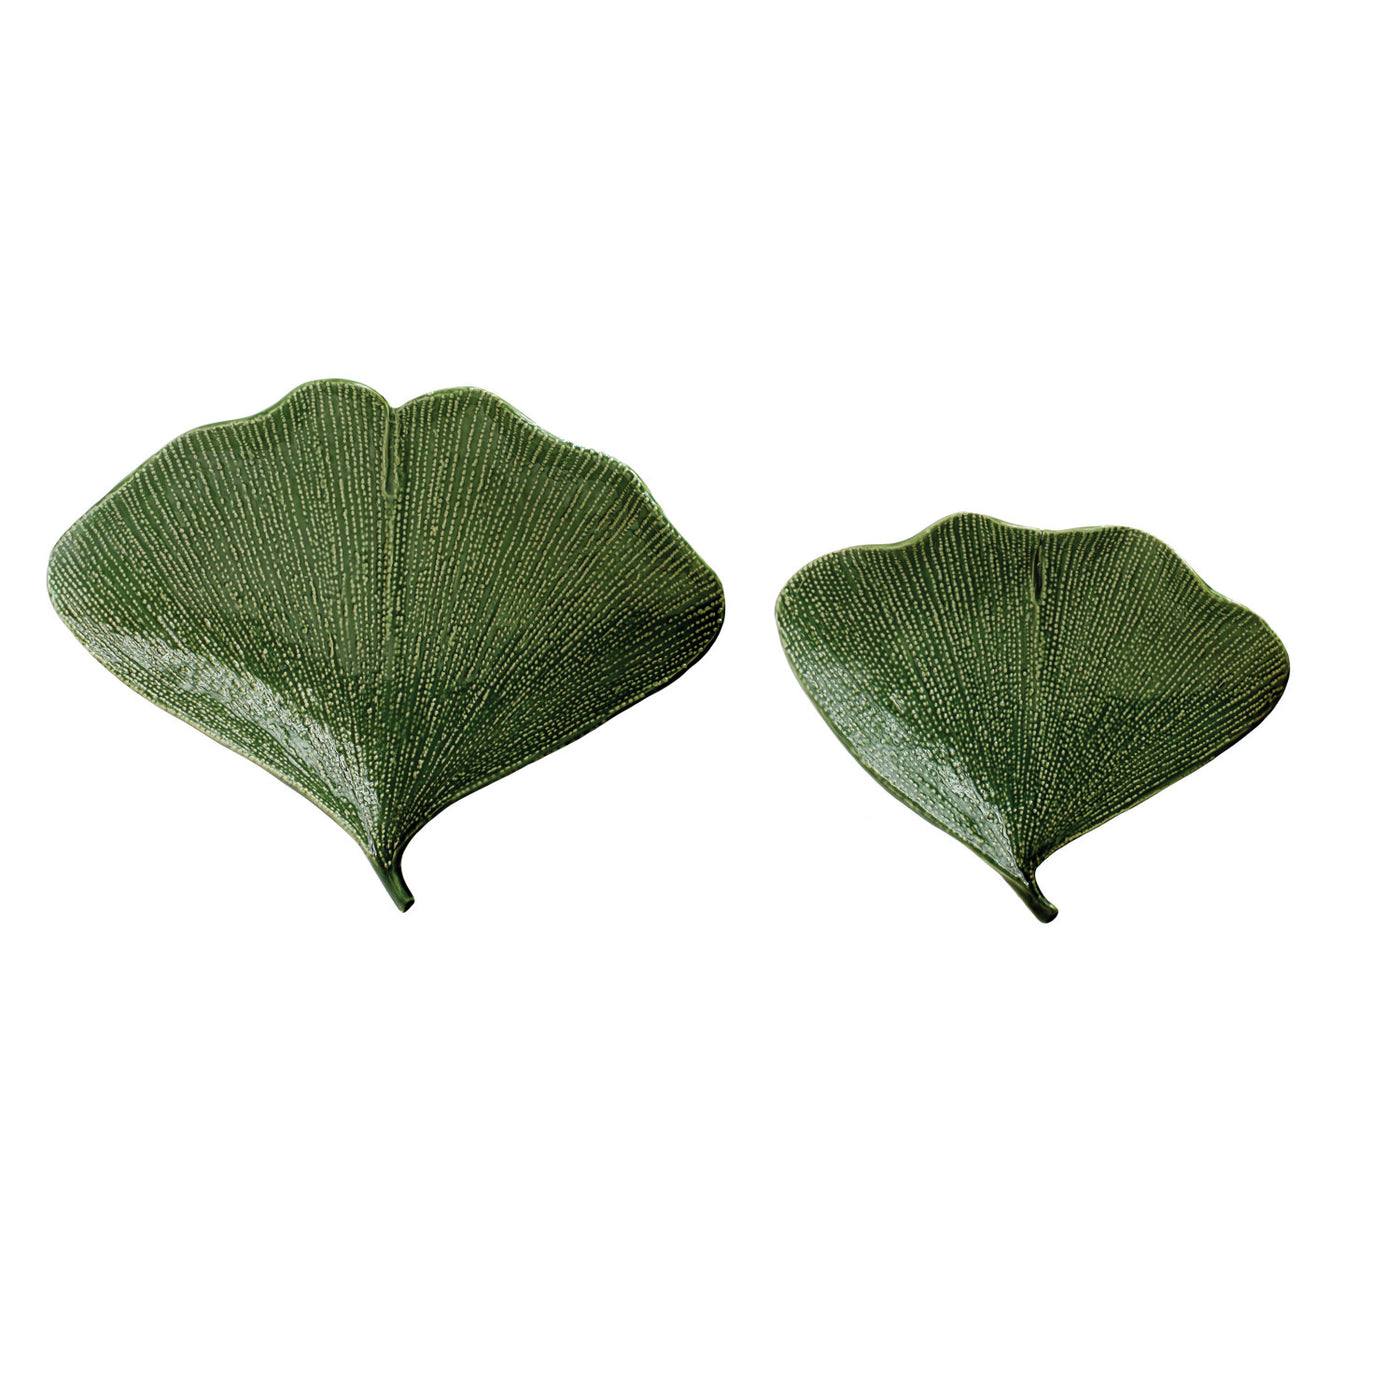 Small Debossed Stoneware Gingko Leaf Shaped Plate